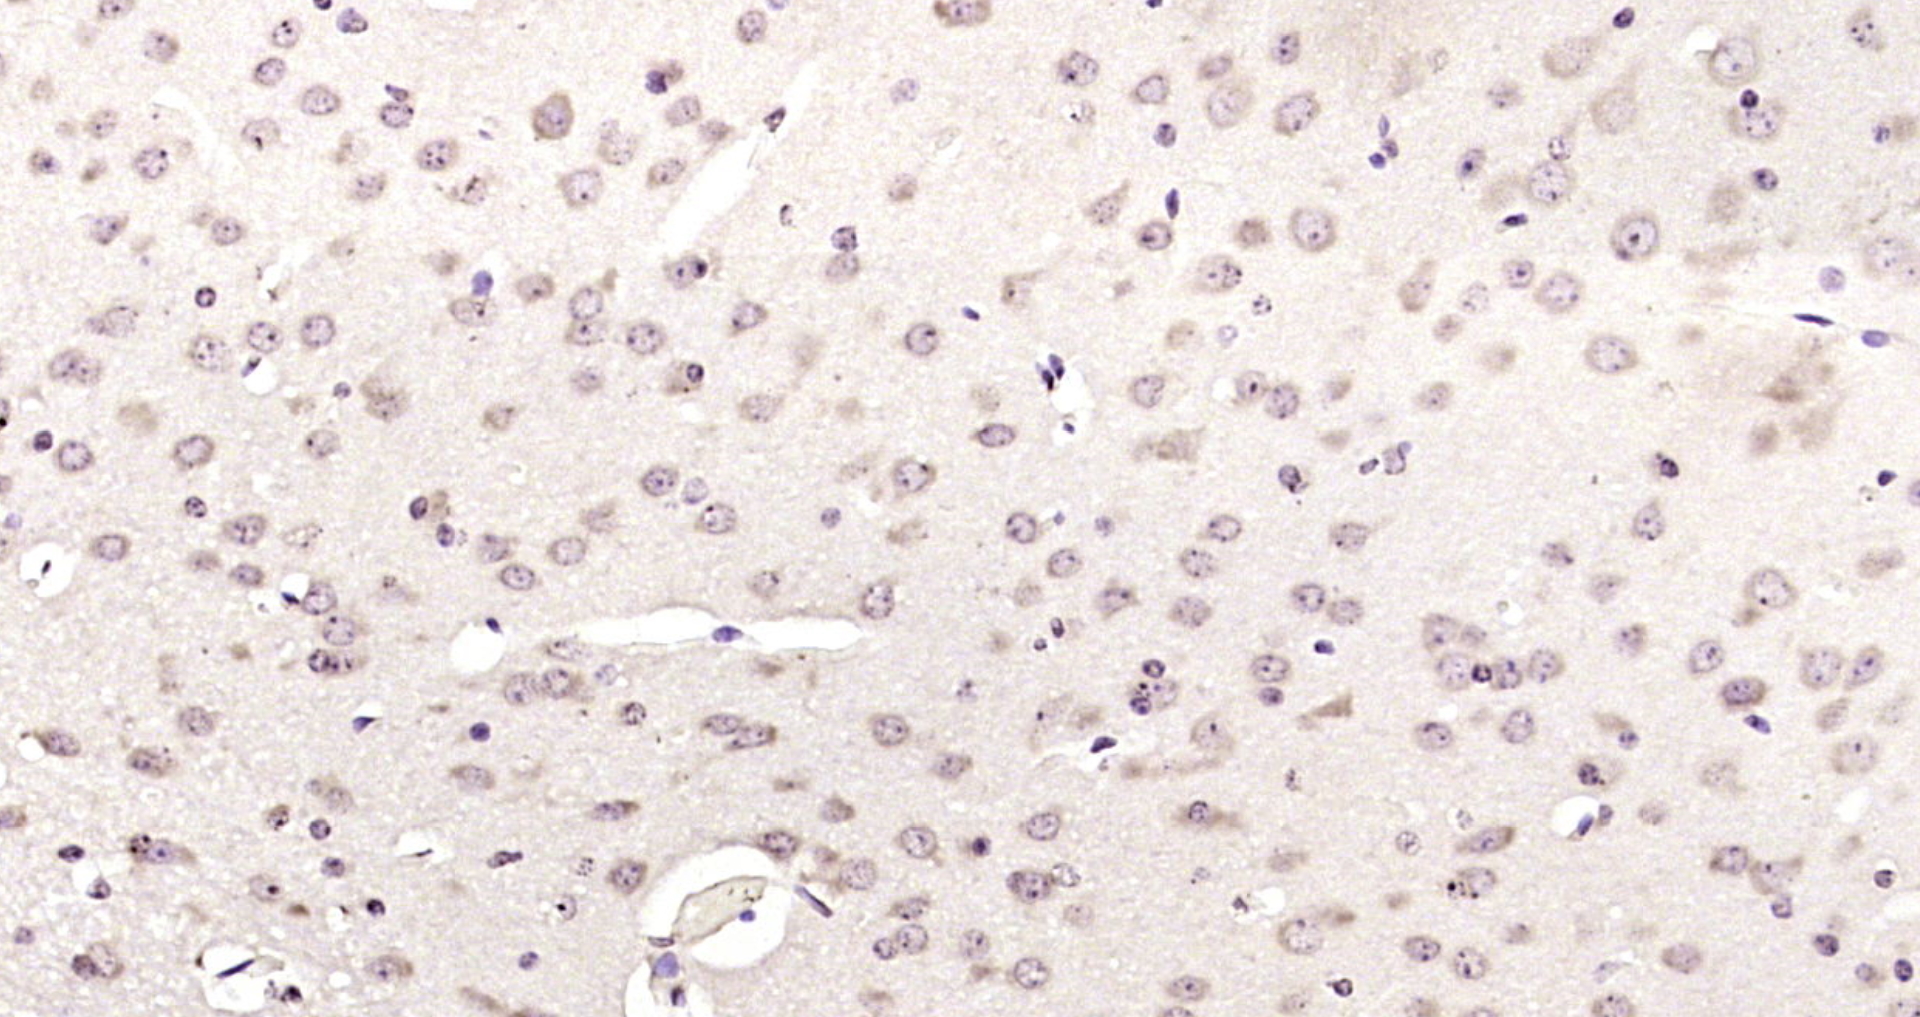 Paraformaldehyde-fixed, paraffin embedded Mouse brain; Antigen retrieval by boiling in sodium citrate buffer (pH6.0) for 15min; Block endogenous peroxidase by 3% hydrogen peroxide for 20 minutes; Blocking buffer (normal goat serum) at 37°C for 30min; Antibody incubation with RFC1 Polyclonal Antibody, Unconjugated (bs-11304R) at 1:200 overnight at 4°C, DAB staining.